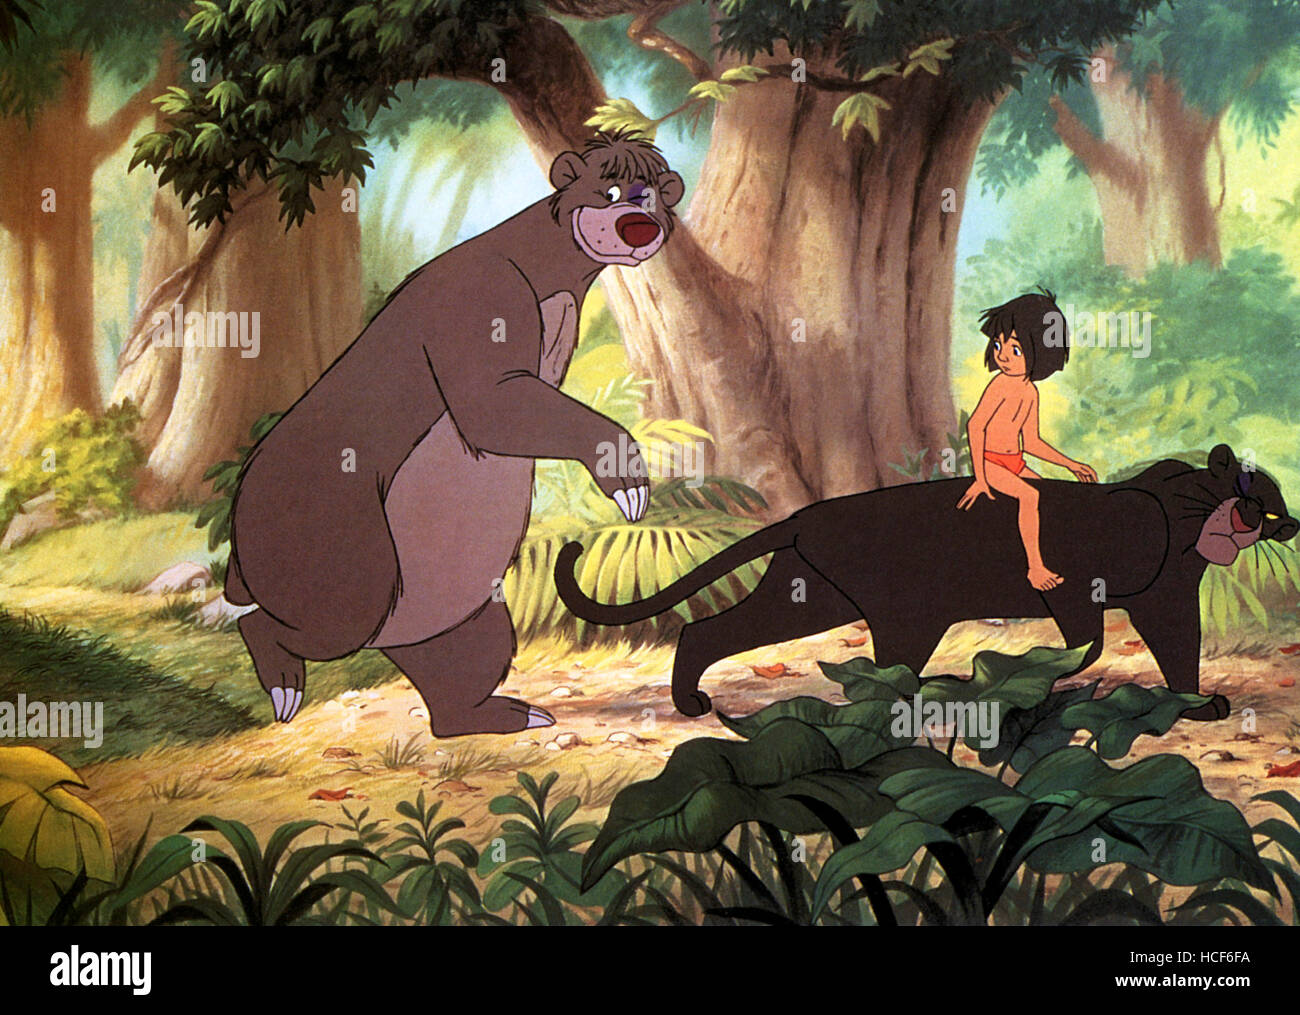 THE JUNGLE BOOK, from left: Baloo the Bear, Mowgli, Bagheera, 1967, ©Walt  Disney Pictures/courtesy Everett Collection Stock Photo - Alamy